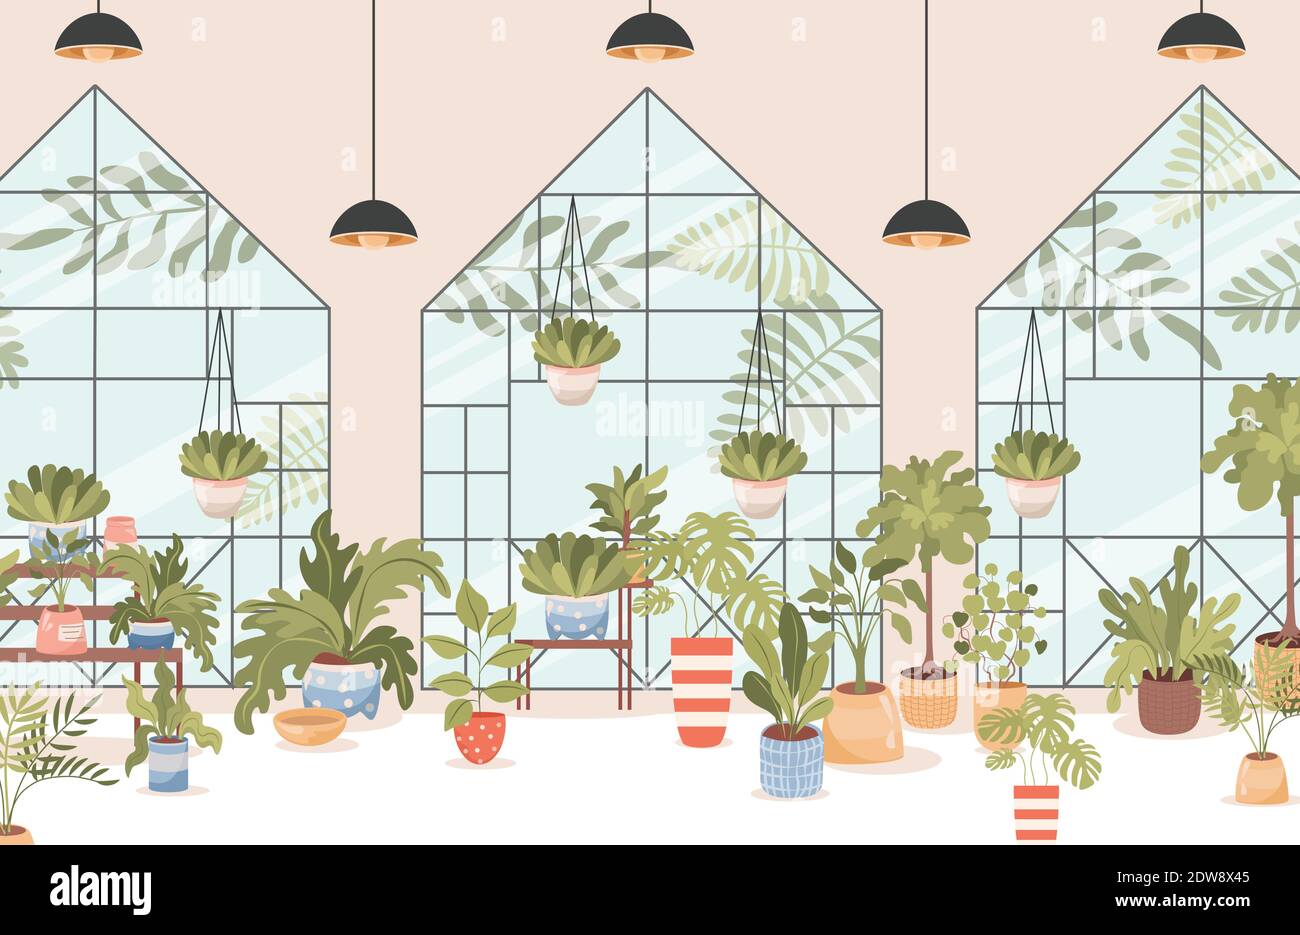 Flower shop vector flat interior design with big windows. Different home and outdoor plants and trees on shelves and stands. Agriculture gardener hobby, garden shop illustration. Stock Vector